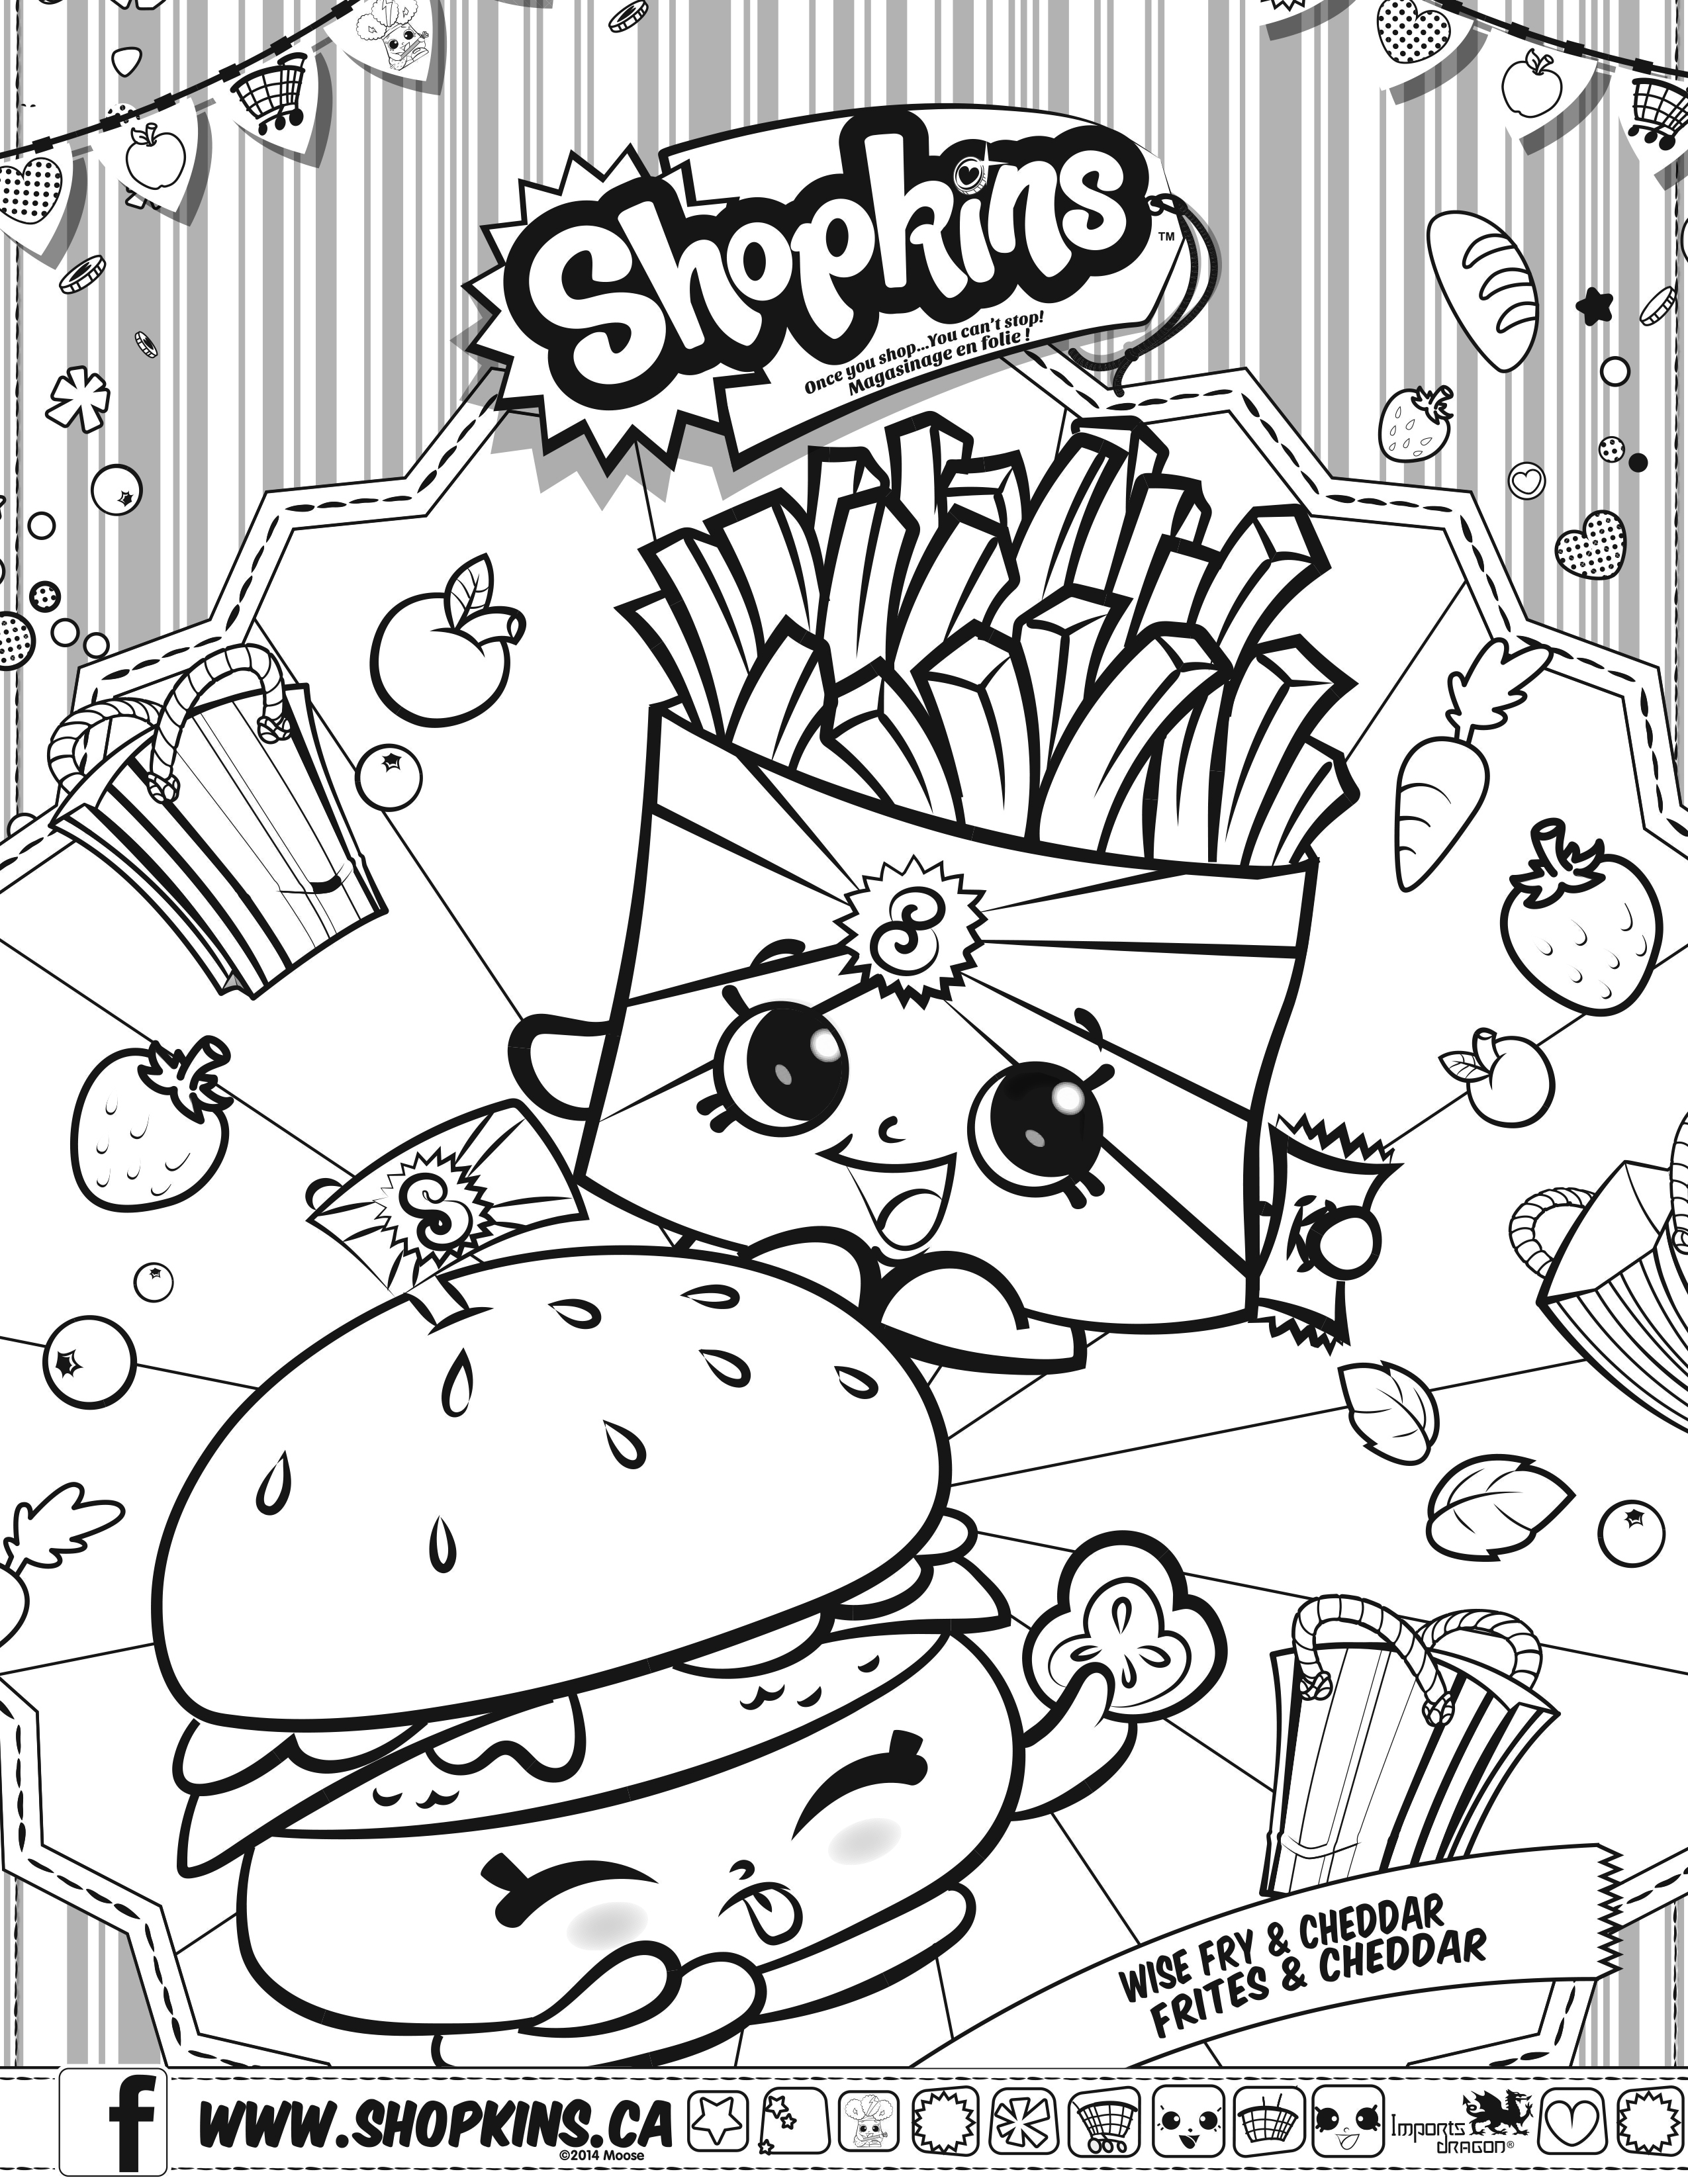 Shopkins coloring pages 7 Diy Craft Ideas Gardening